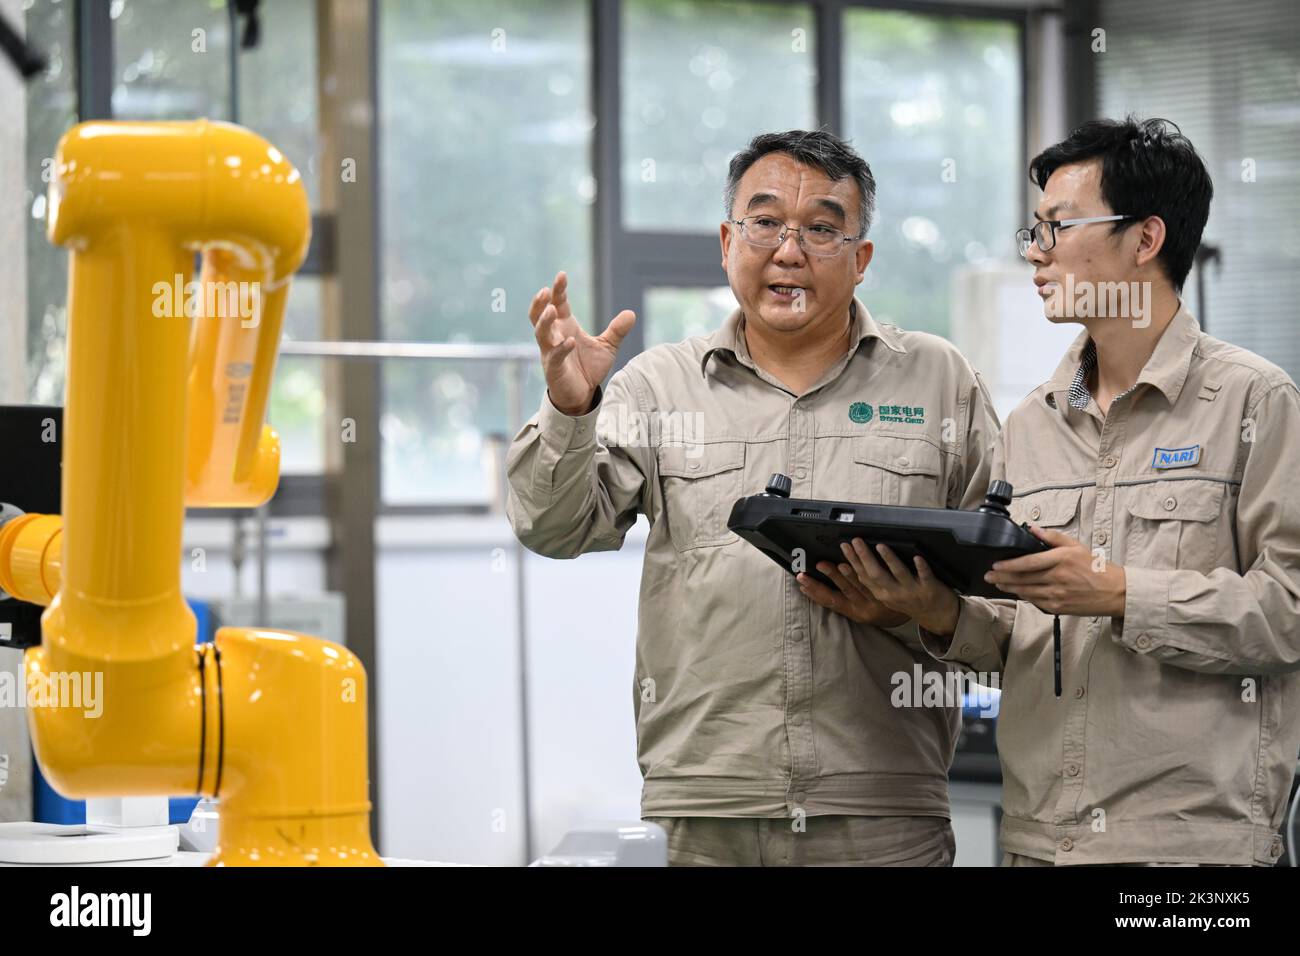 Tianjin. 8th Sep, 2022. Zhang Liming (L) and his colleague adjust a fourth-generation robot in north China's Tianjin, Sept. 8, 2022. Zhang Liming, a delegate to the upcoming 20th National Congress of the Communist Party of China (CPC), is well-known for his innovative prowess. TO GO WITH 'Profile: A CPC national congress delegate pursuing innovation' Credit: Zhao Zishuo/Xinhua/Alamy Live News Stock Photo